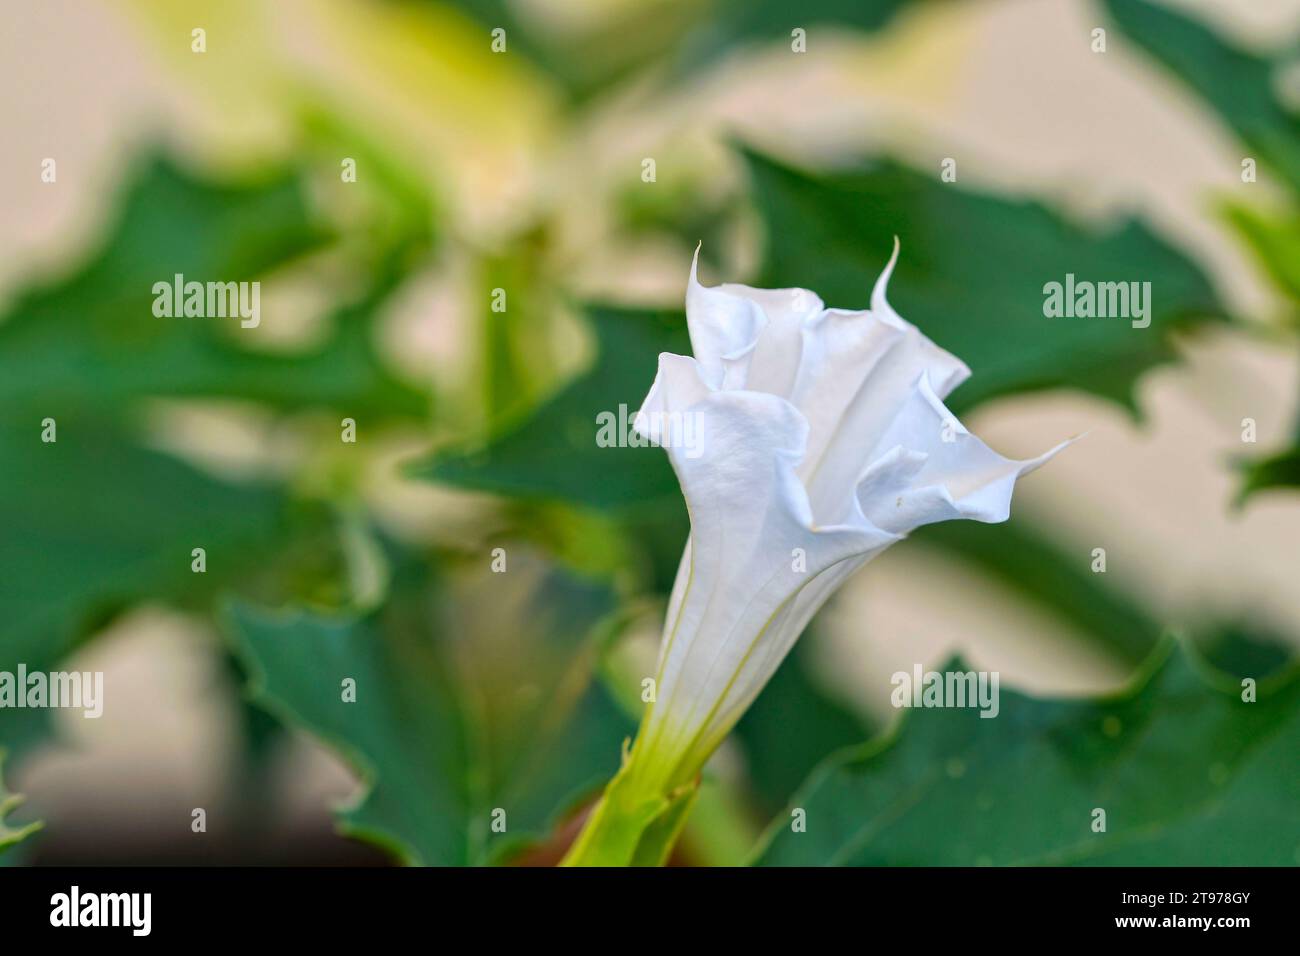 Datura stramonium, known by the common names, jimson weed, ditch weed, stink weed, Korean morning glory, Jamestown weed, thorn apple, angel's trumpet, Stock Photo